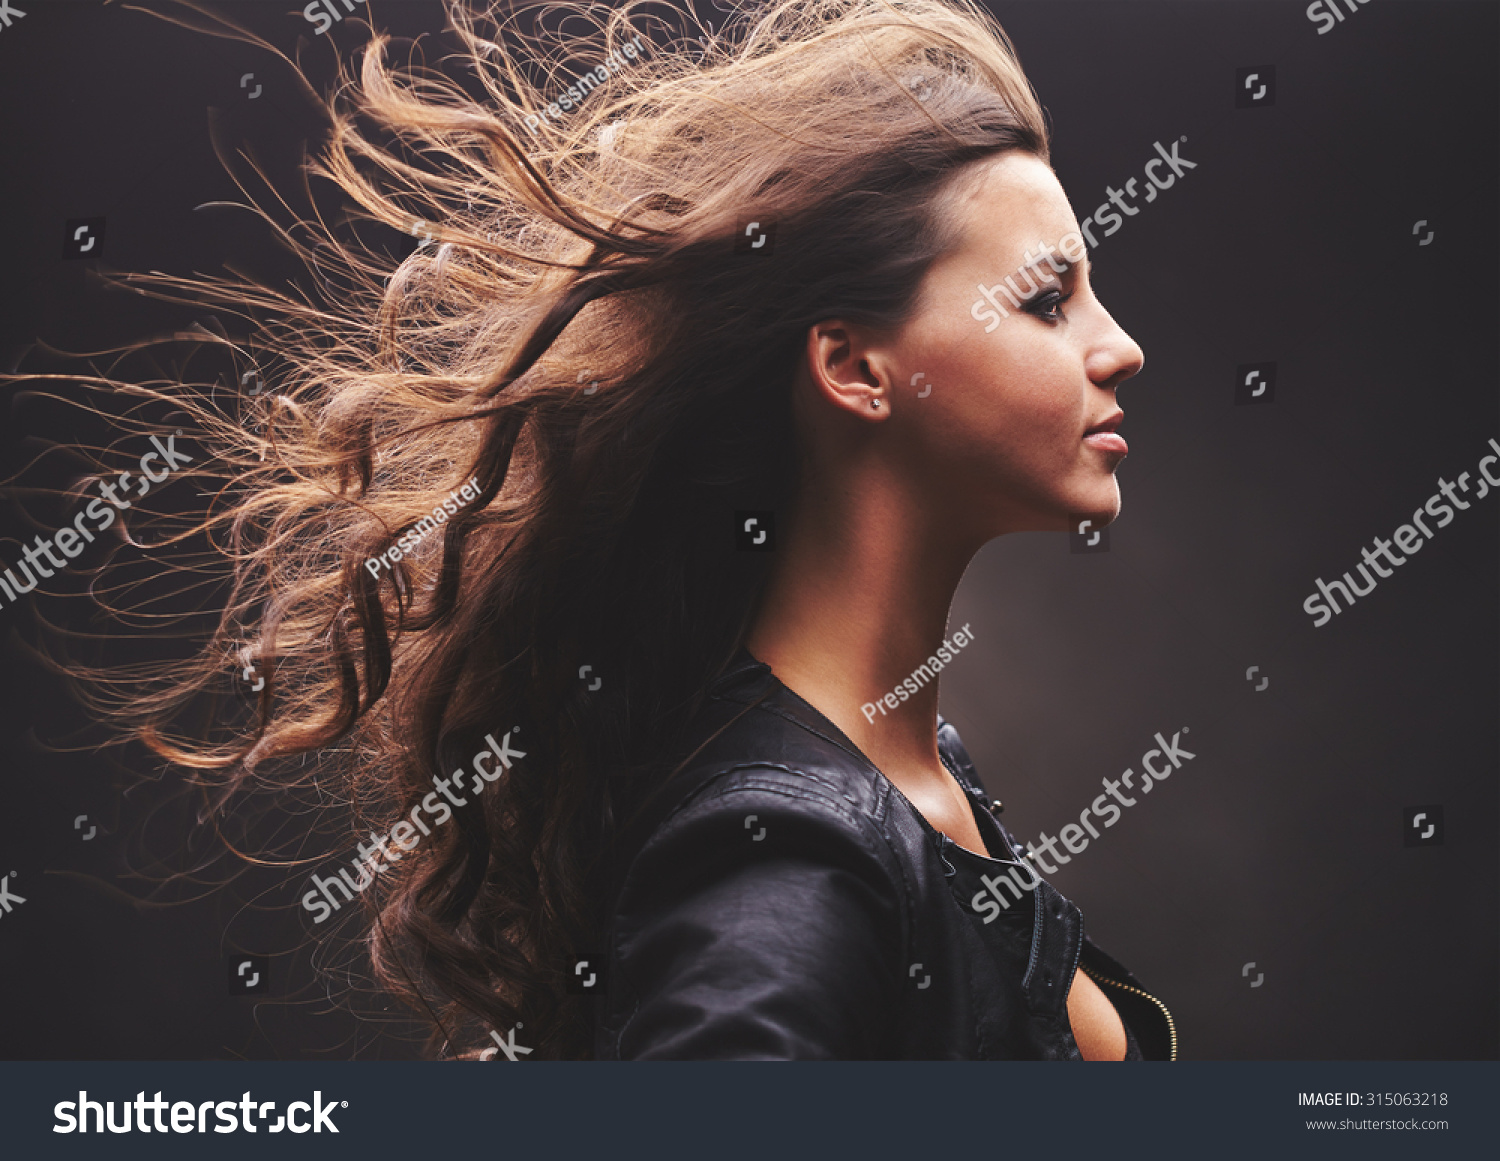 Profile Of Cool Girl With Long Curly Hair Stock Photo 315063218 ...